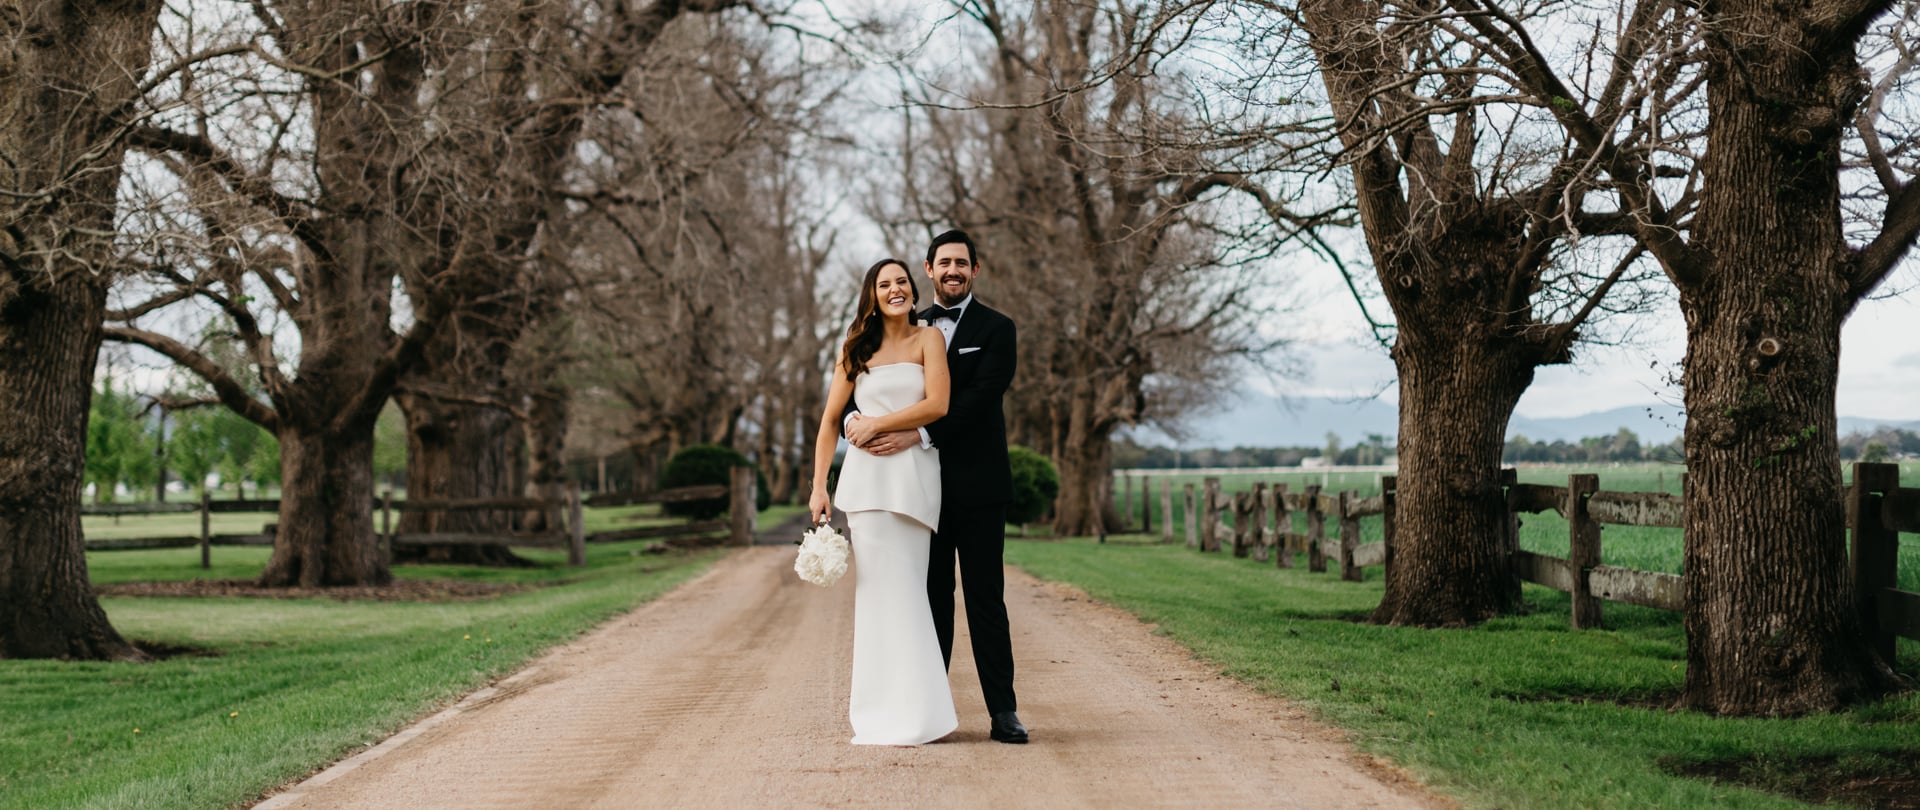 Alice & James Wedding Video Filmed atBerry,New South Wales